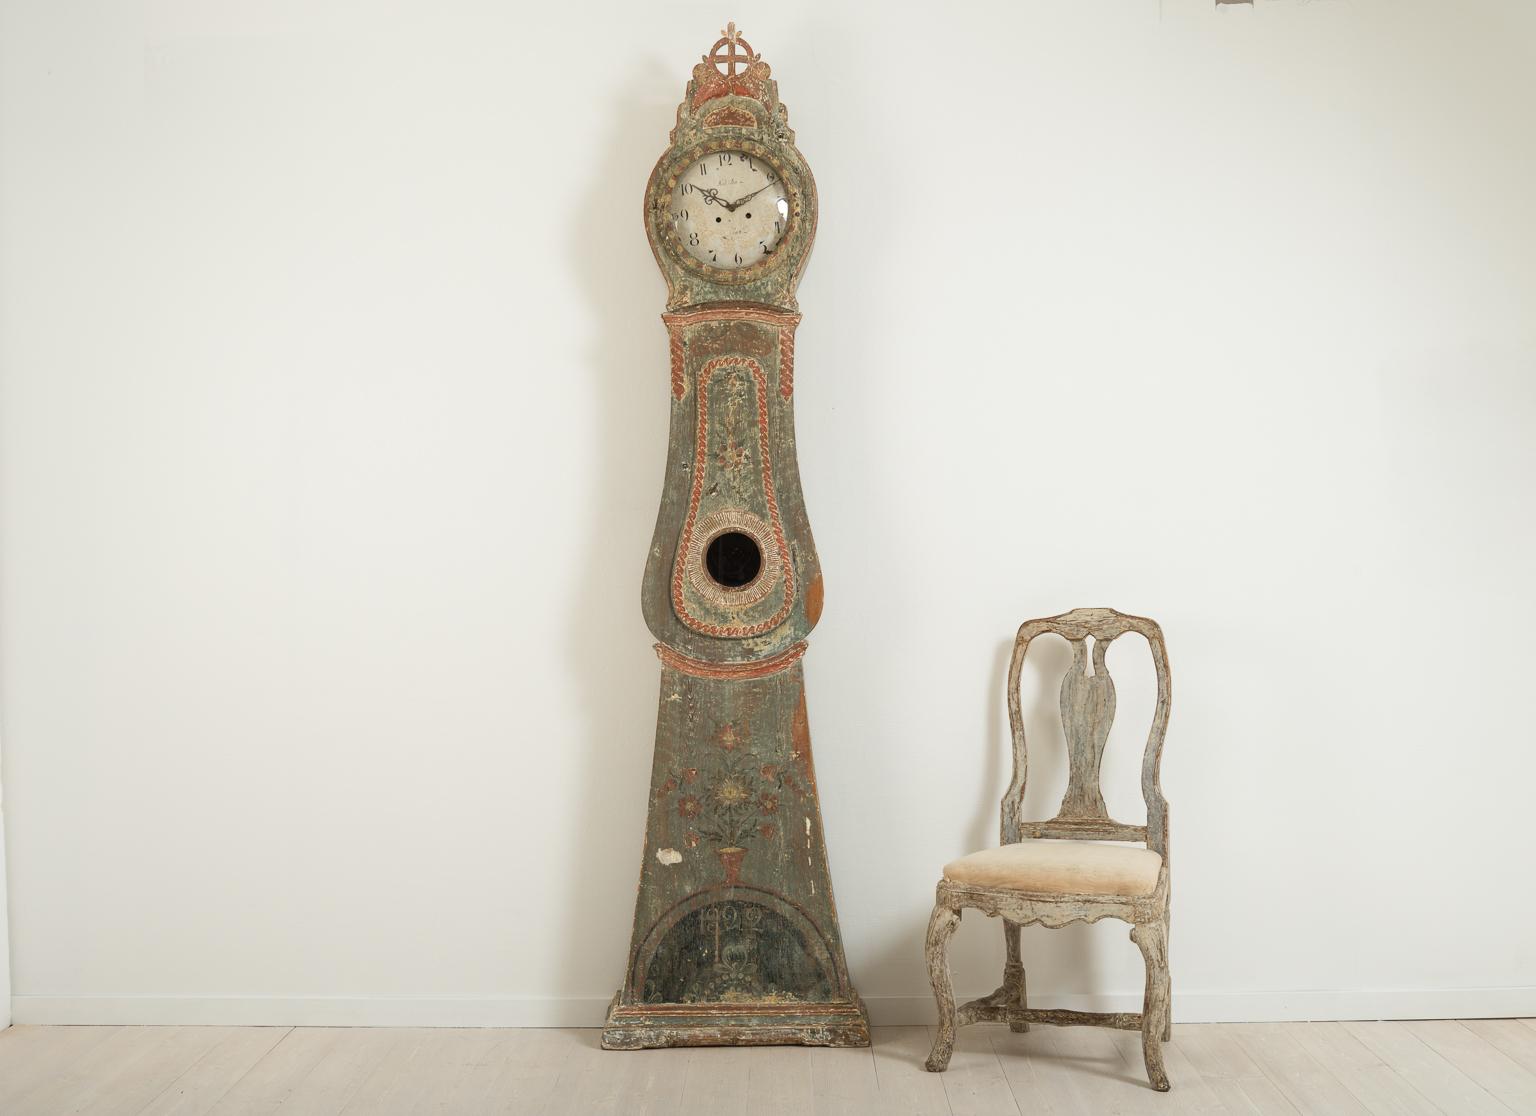 Long case clock from northern Sweden. The clock has carved wooden decorations and is dry scraped to original paint. Dated 1822. Original mechanism, pendulum and weights. The clock face have minor marks, see picture. The clock was working at the time